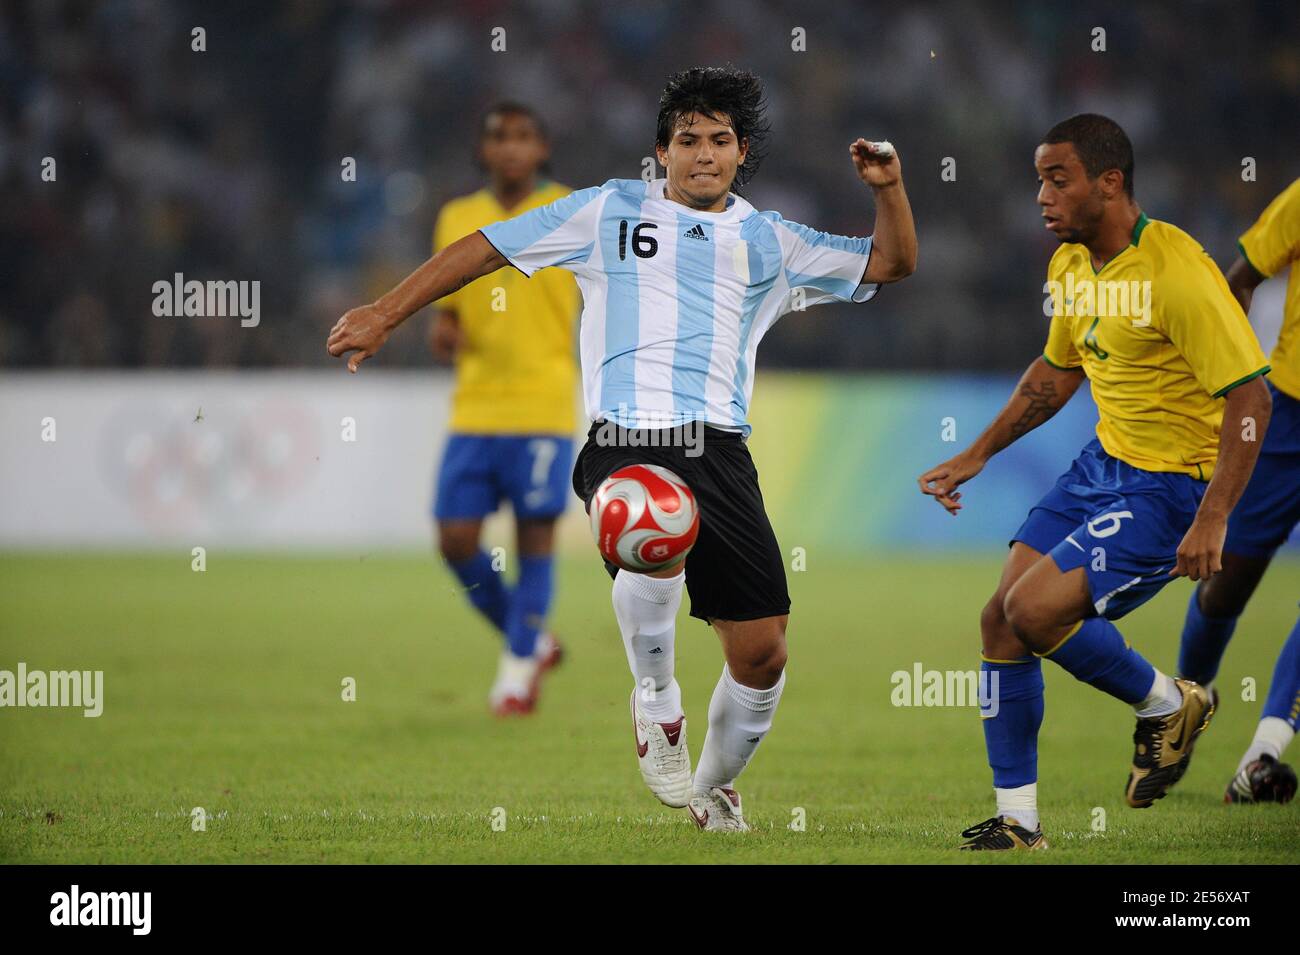 Argentina's Sergio Aguero during the football semi-final match held at the Worker's Stadium for the 2008 Beijing Olympics, August 19, 2008. Argentina defeats Brazil 3-0. Photo by Gouhier-Hahn-Nebinger/Cameleon/ABACAPRESS.COM Stock Photo